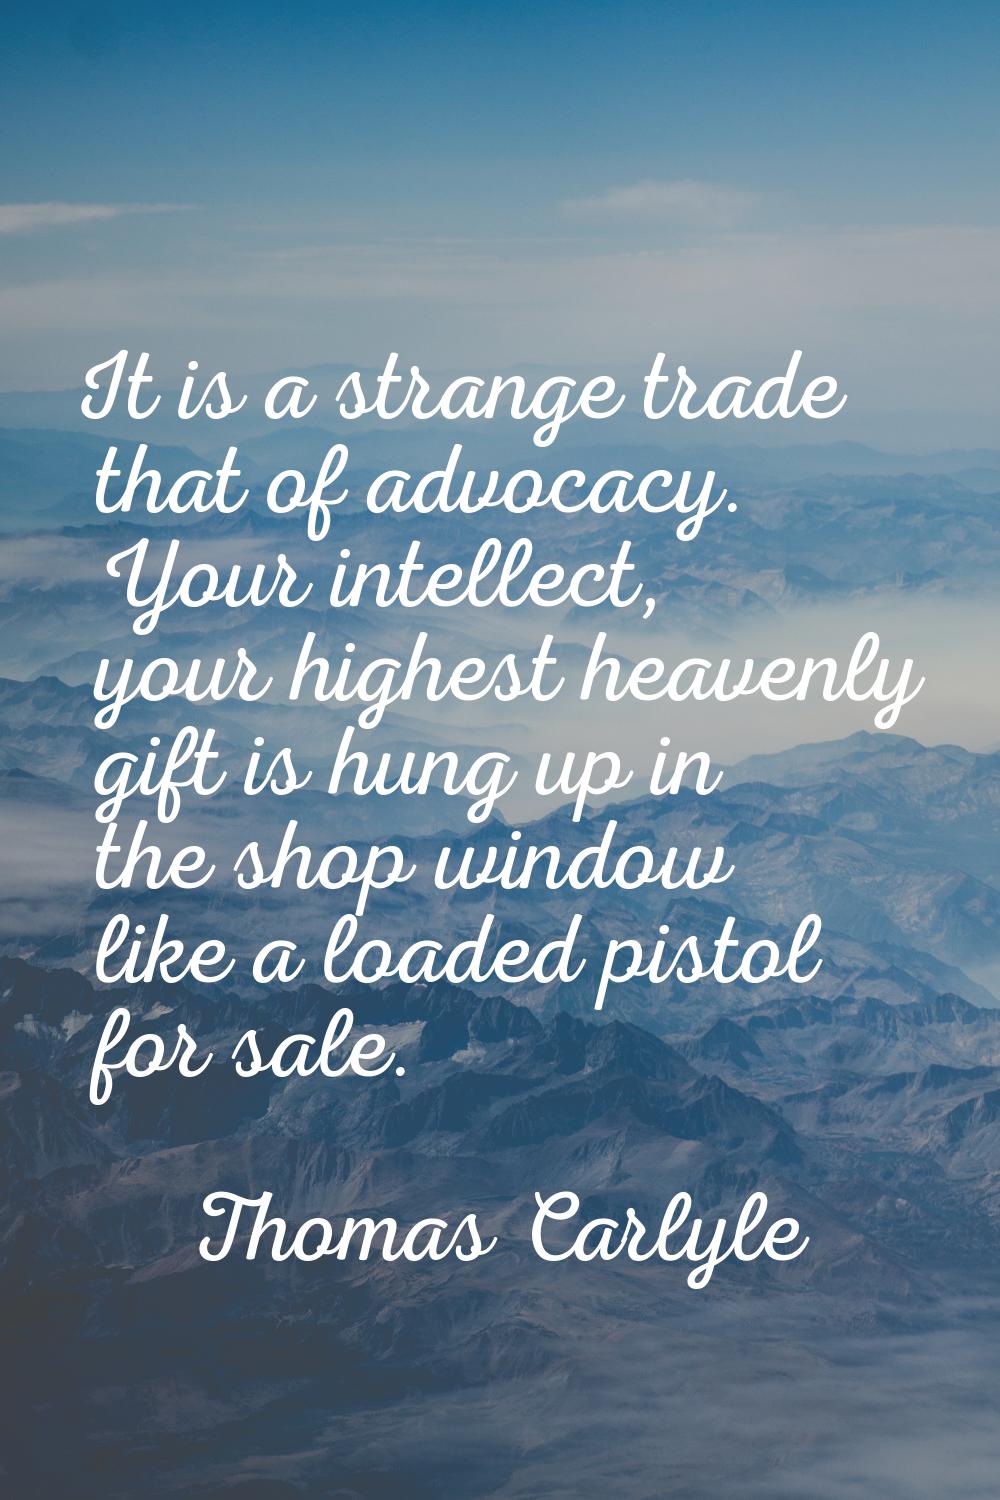 It is a strange trade that of advocacy. Your intellect, your highest heavenly gift is hung up in th